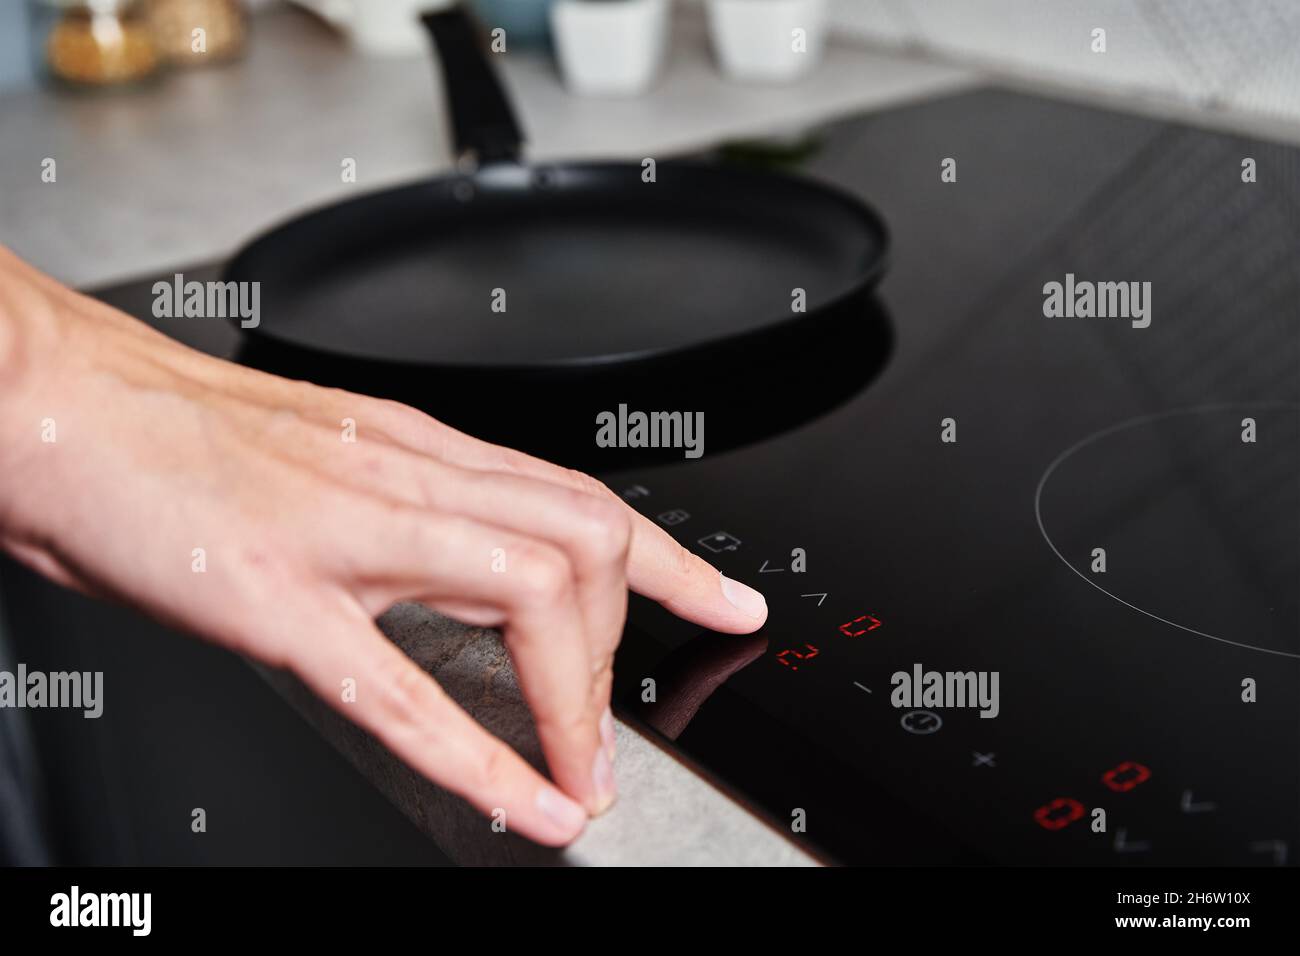 https://c8.alamy.com/comp/2H6W10X/modern-kitchen-appliance-woman-hand-turn-on-induction-stove-to-cook-finger-touching-sensor-button-on-induction-or-electrical-hob-2H6W10X.jpg